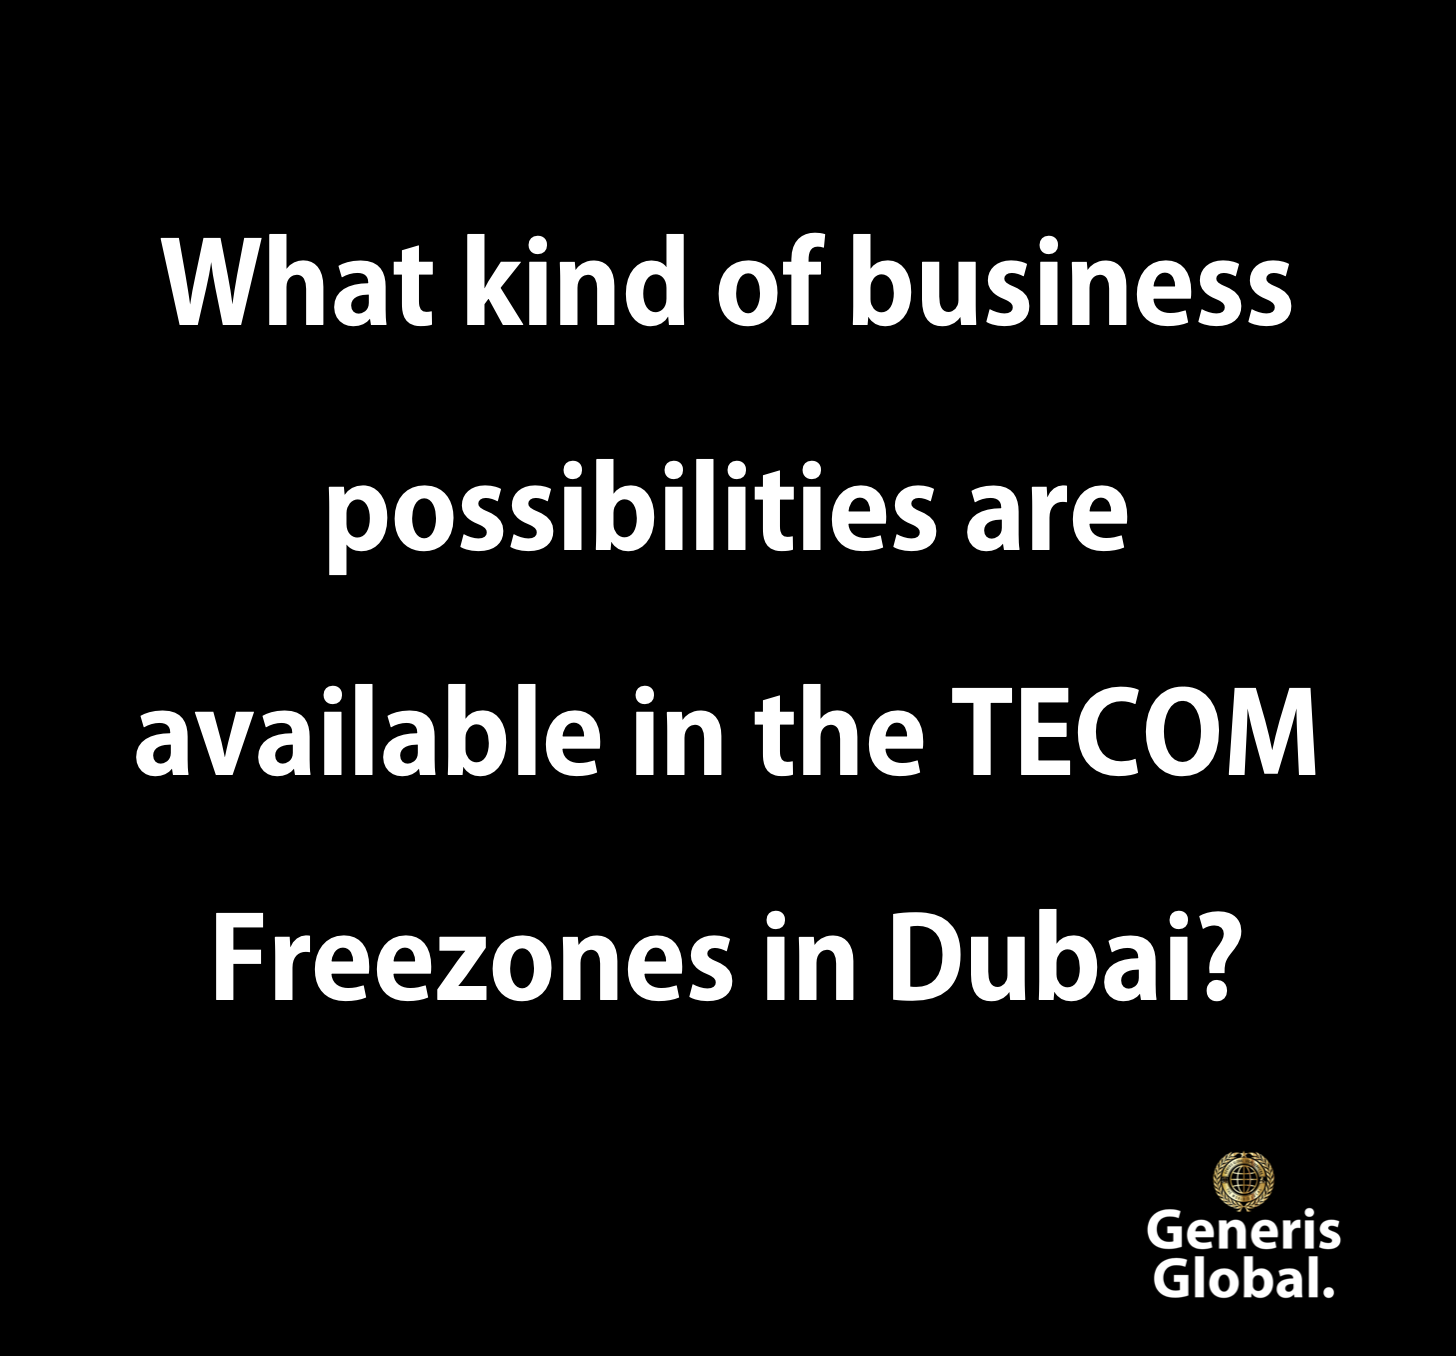 What kind of business possibilities are available in the TECOM Freezones in Dubai?